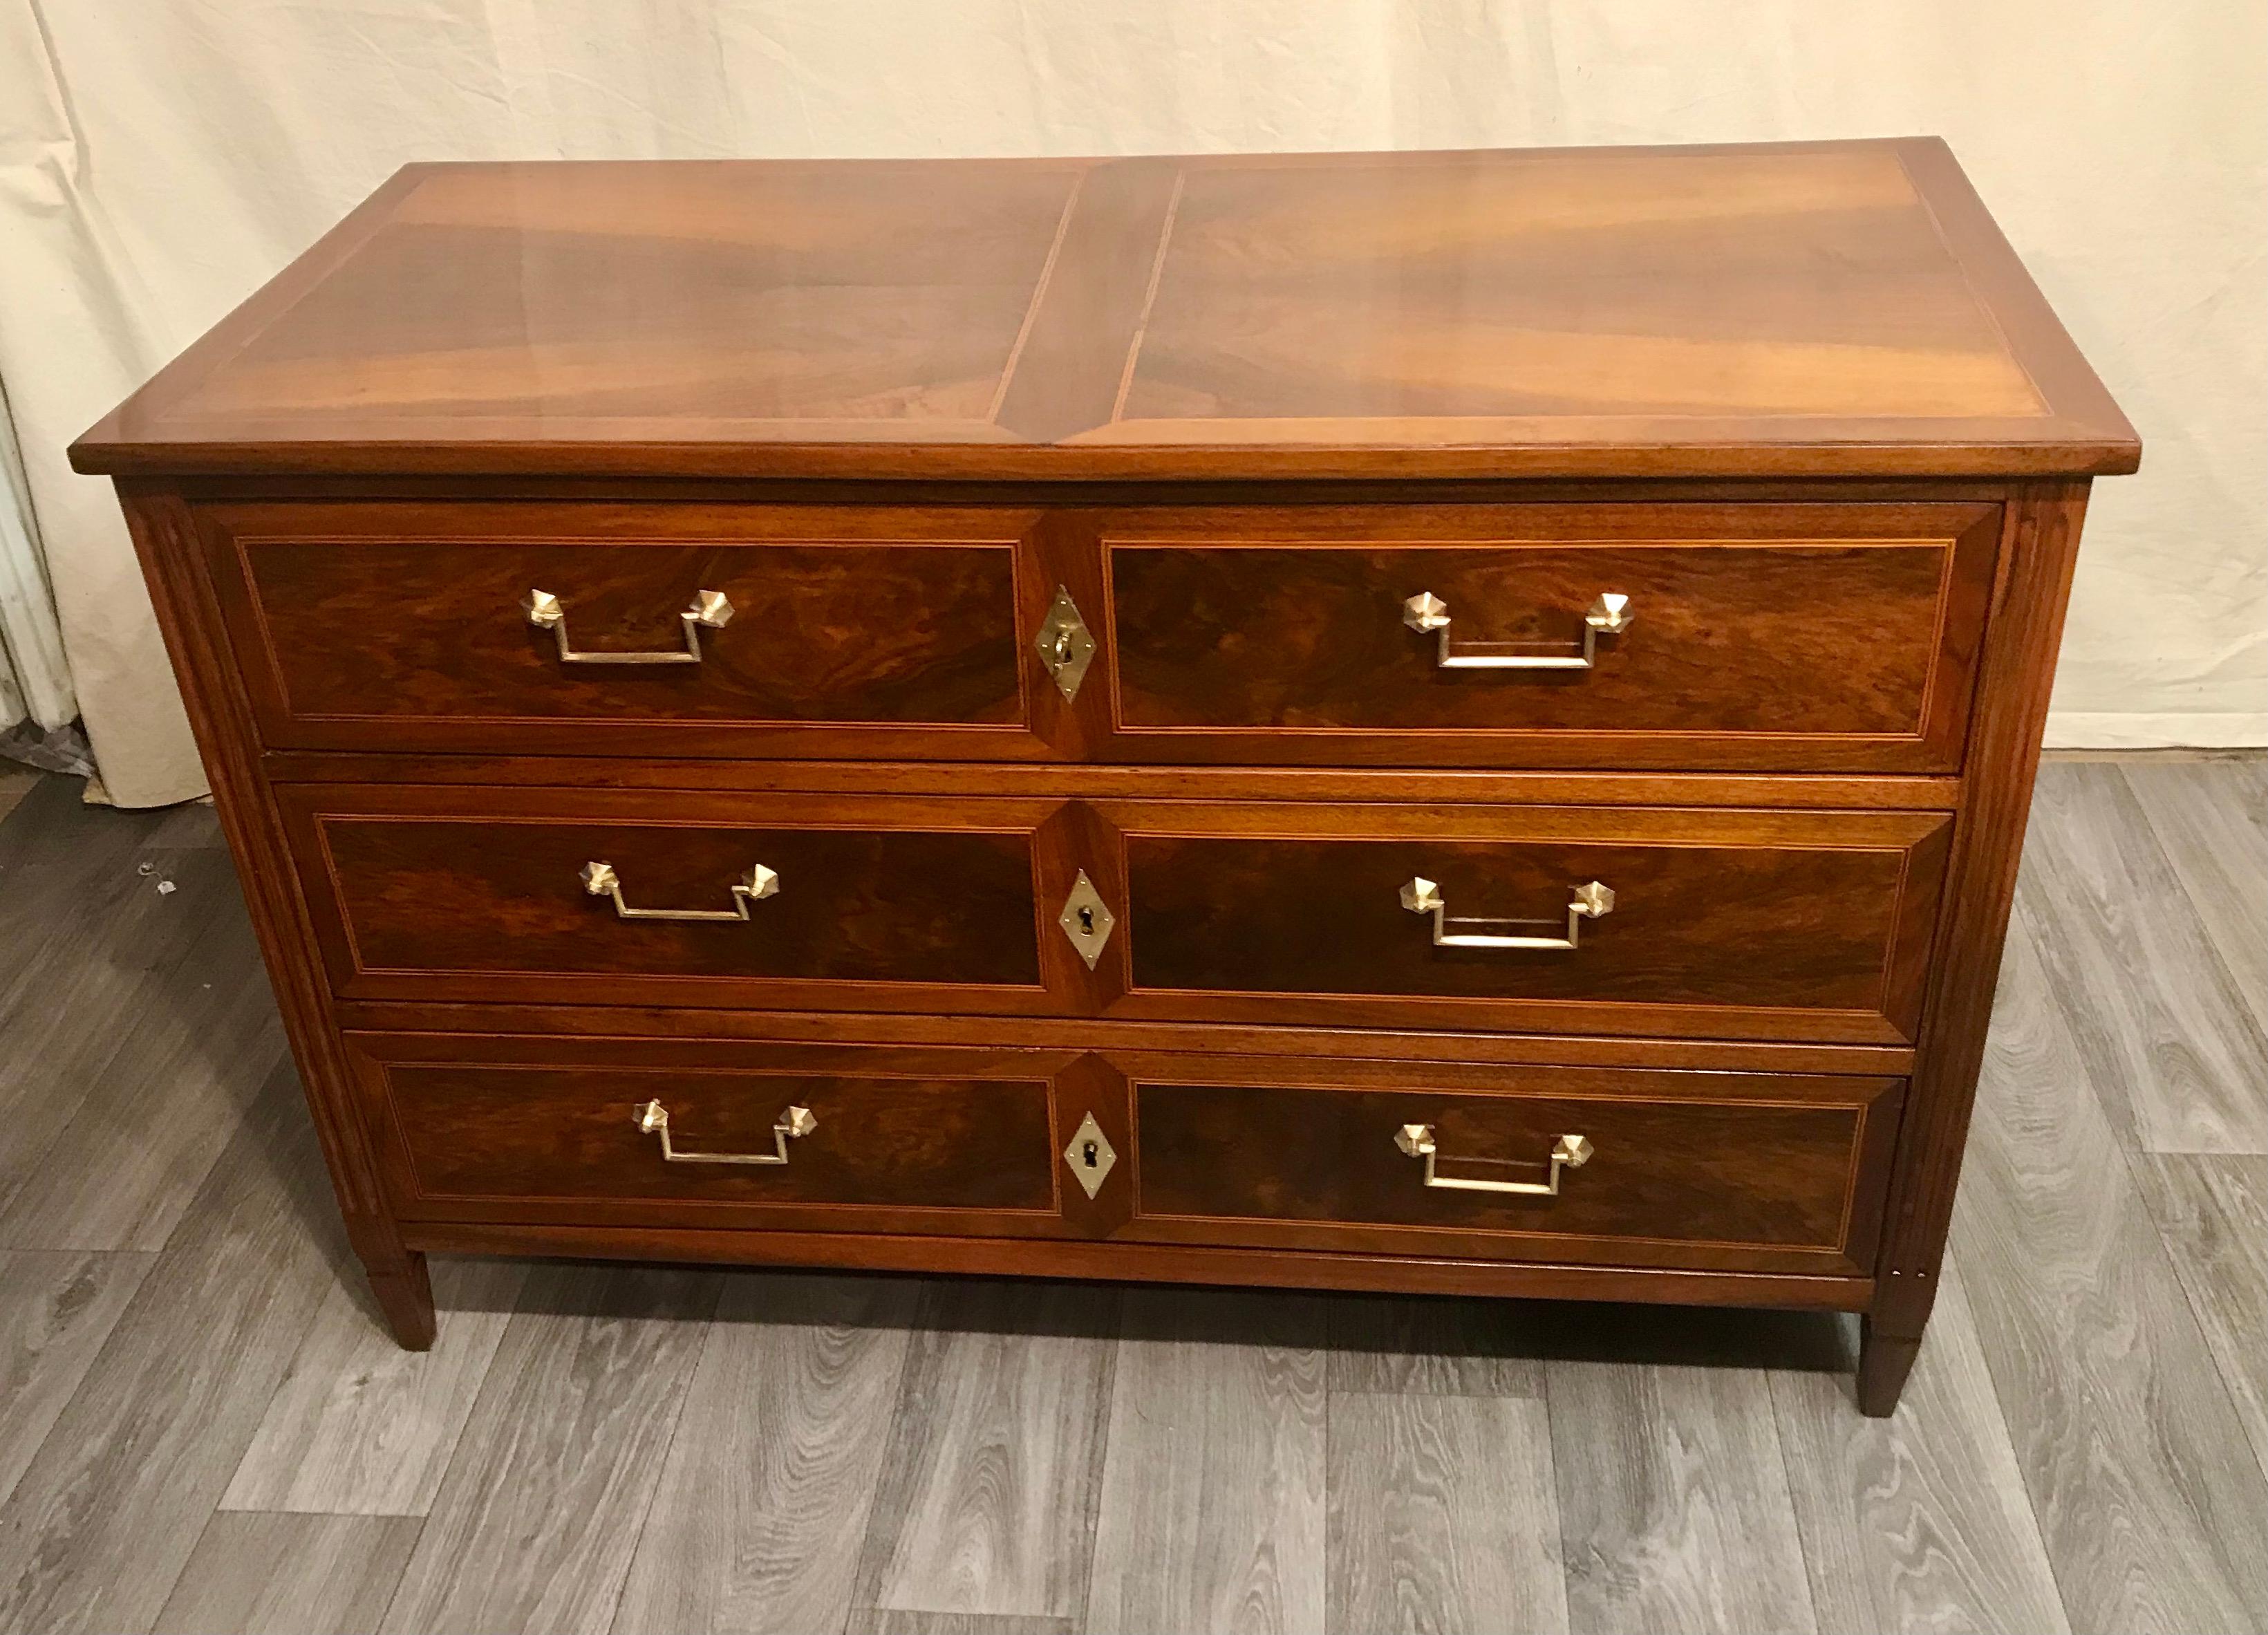 This original Louis XVI chest of drawers dates back to 1780 and comes from the southern part of Germany. 
The three drawer commode has a sleek design and stands on four pointed feet. It has a very pretty walnut veneer which is embellished with